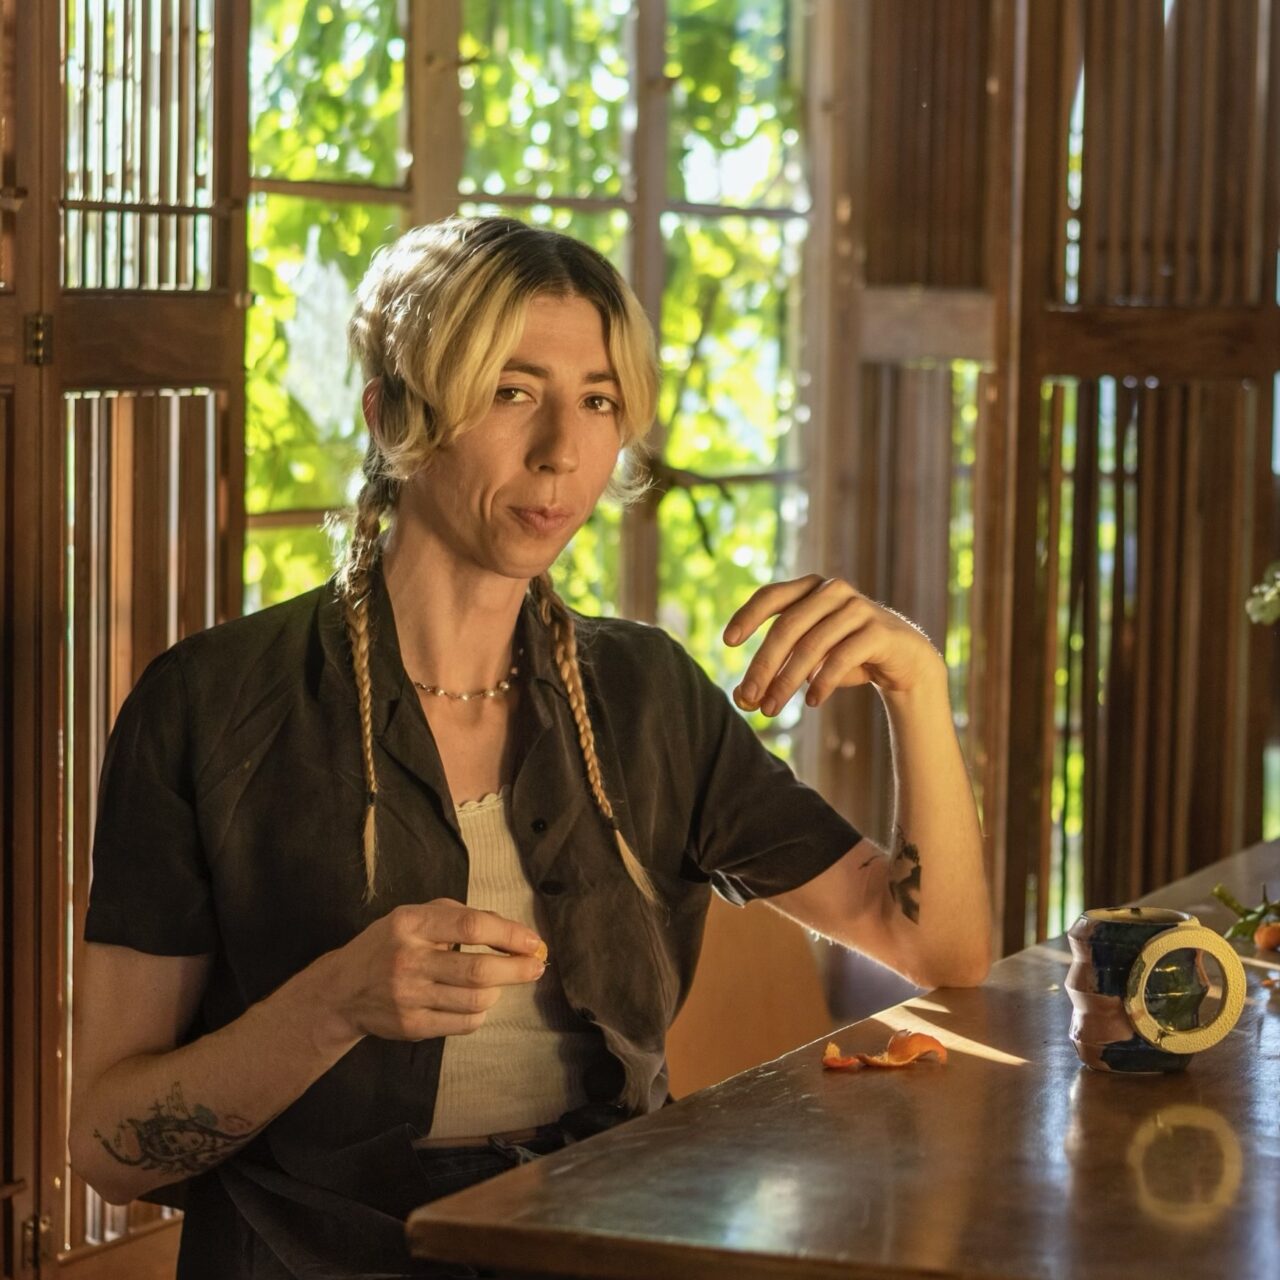 A white tattooed trans woman sits at a kitchen table backlit by a green passionflower vine in the window. She has blond center-parted short hair, with long twin braids draped over the front of her open charcoal button up shirt. She looks into the camera while eating a tangerine.